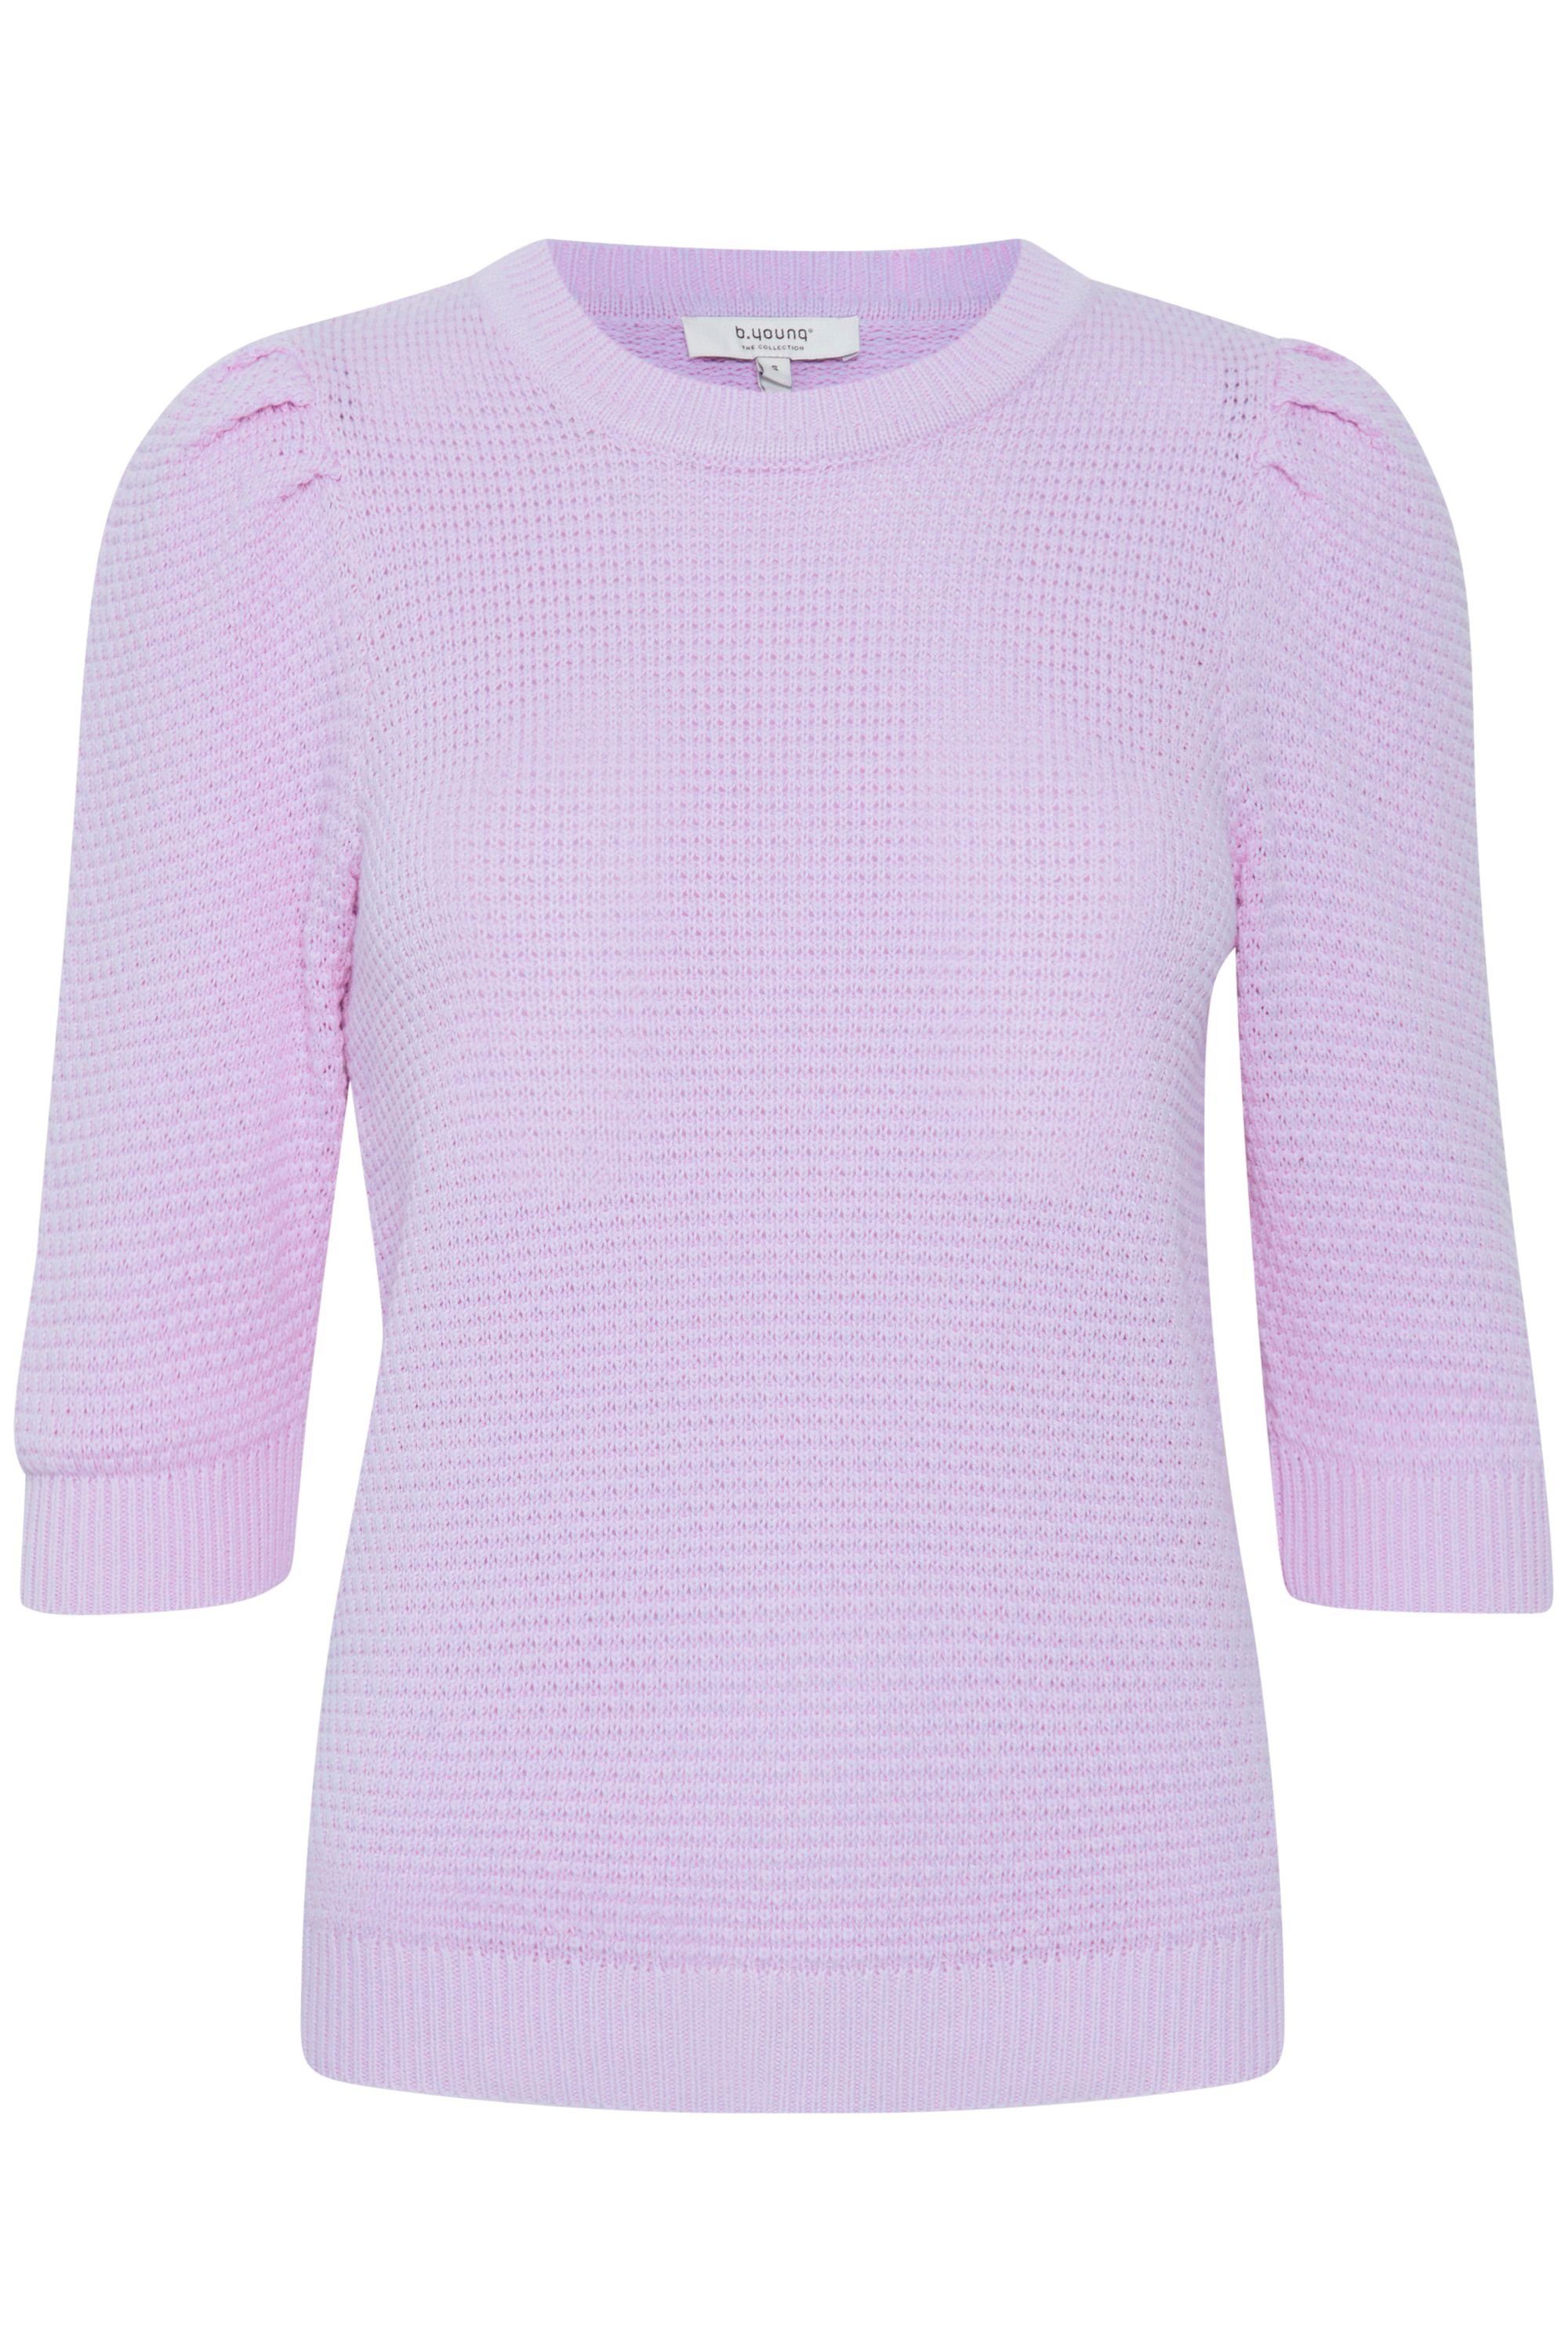 b.young Strickpullover BYMIKALA JUMPER SS -20811028 Purple Rose (153716)